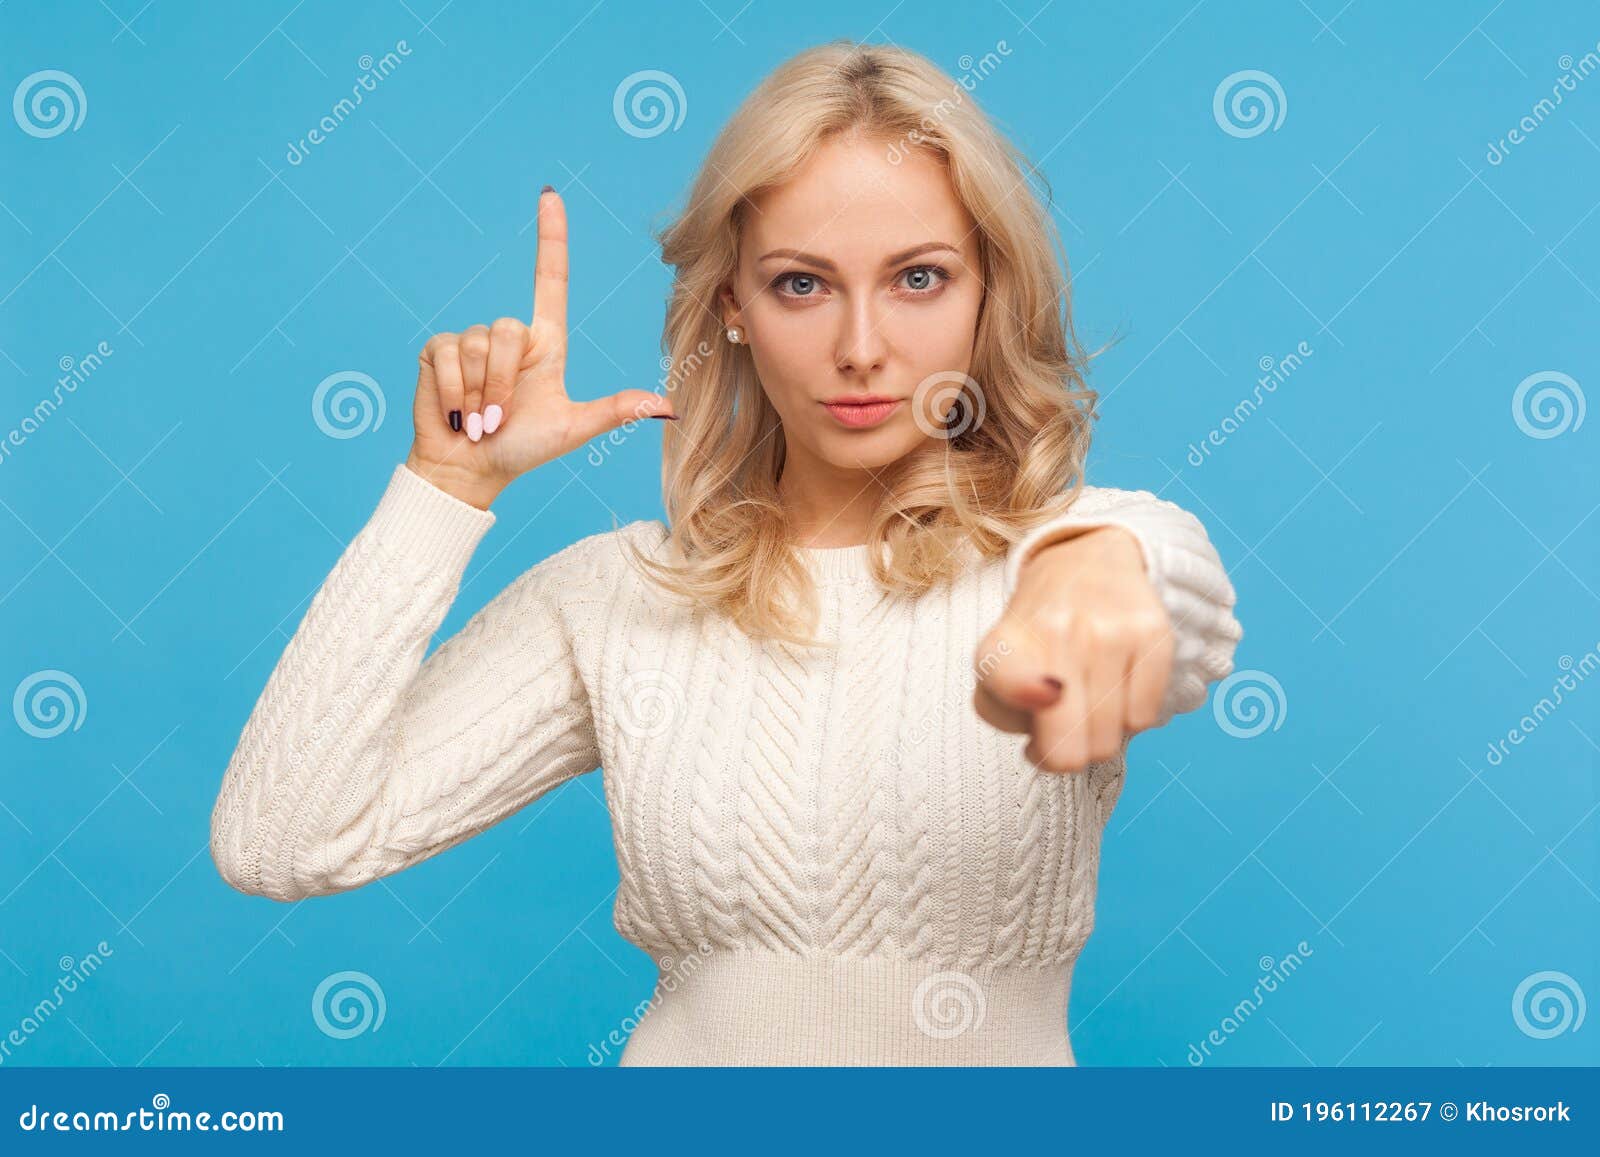 grumpy disrespectful woman with blond hair showing loser gesture and pointing finger at camera, blaming and mocking